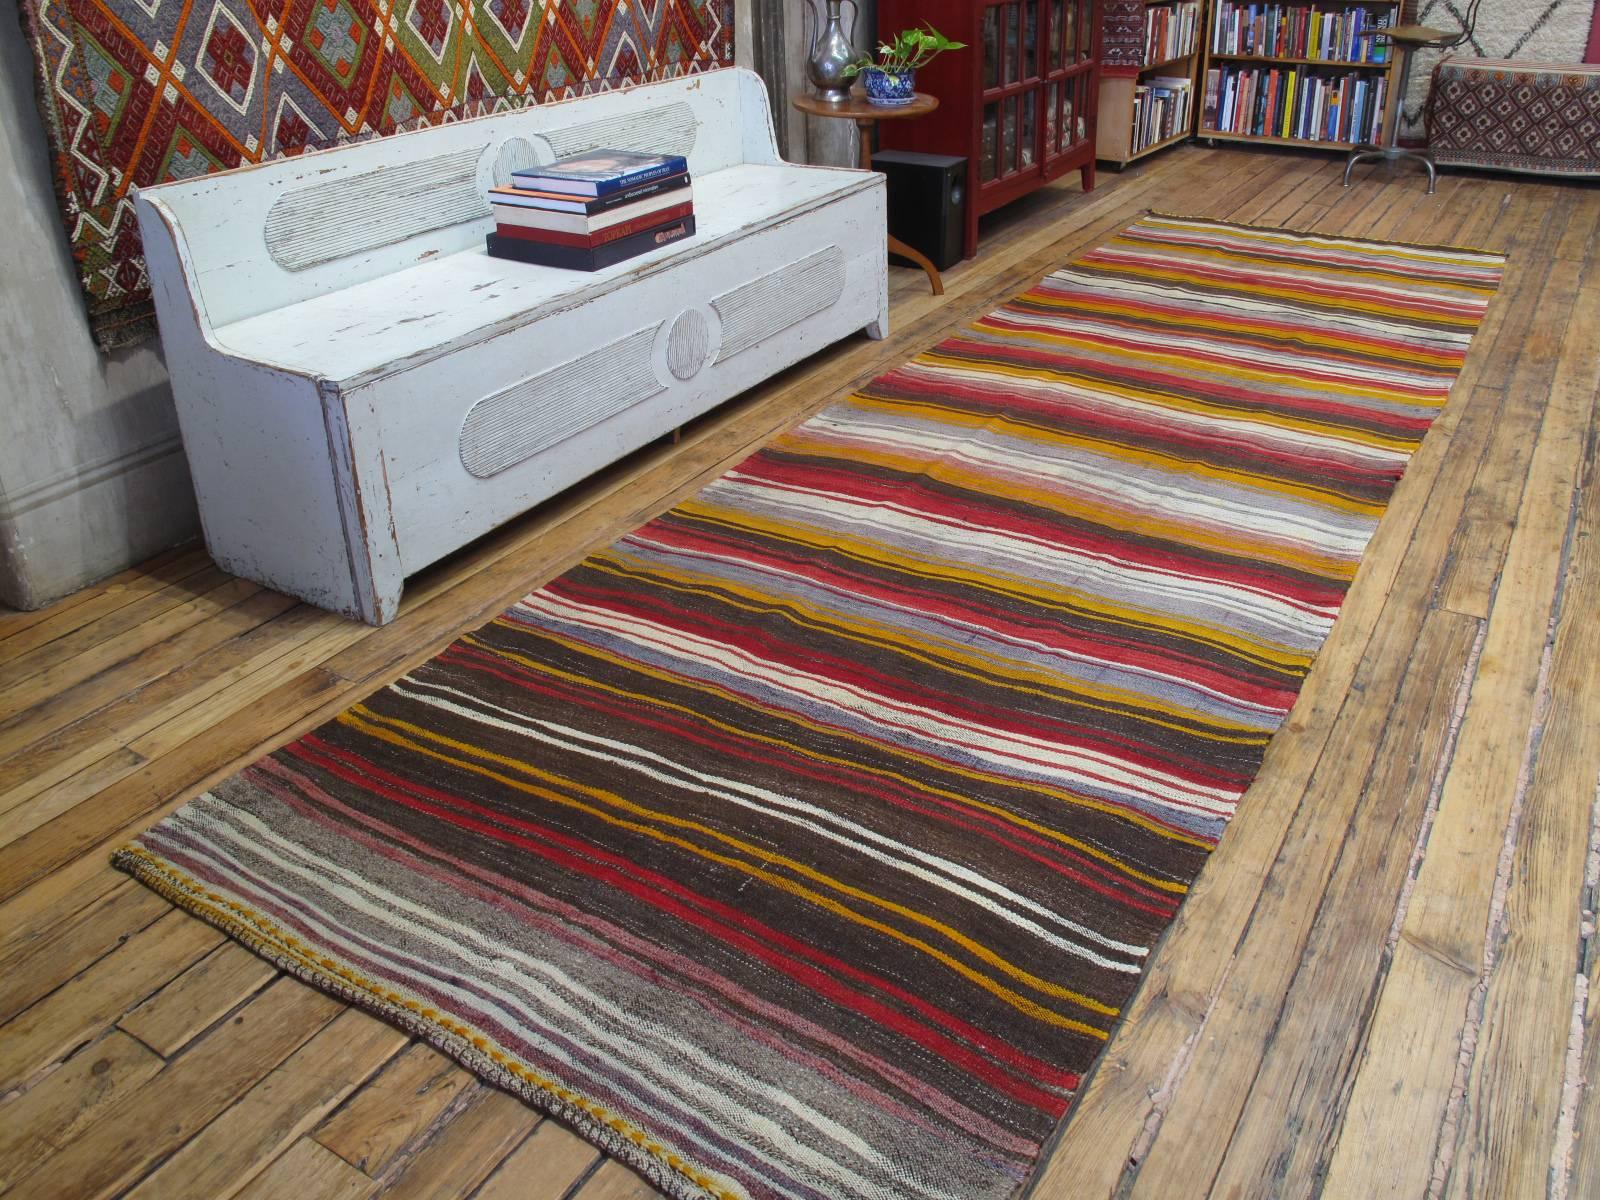 Banded Kilim, wide runner rug. A beautiful old tribal flat-weave runner rug from West-Central Turkey, woven in characteristic wide runner format, with alternating bands of color. An older example with great patina and pleasing irregularities in its